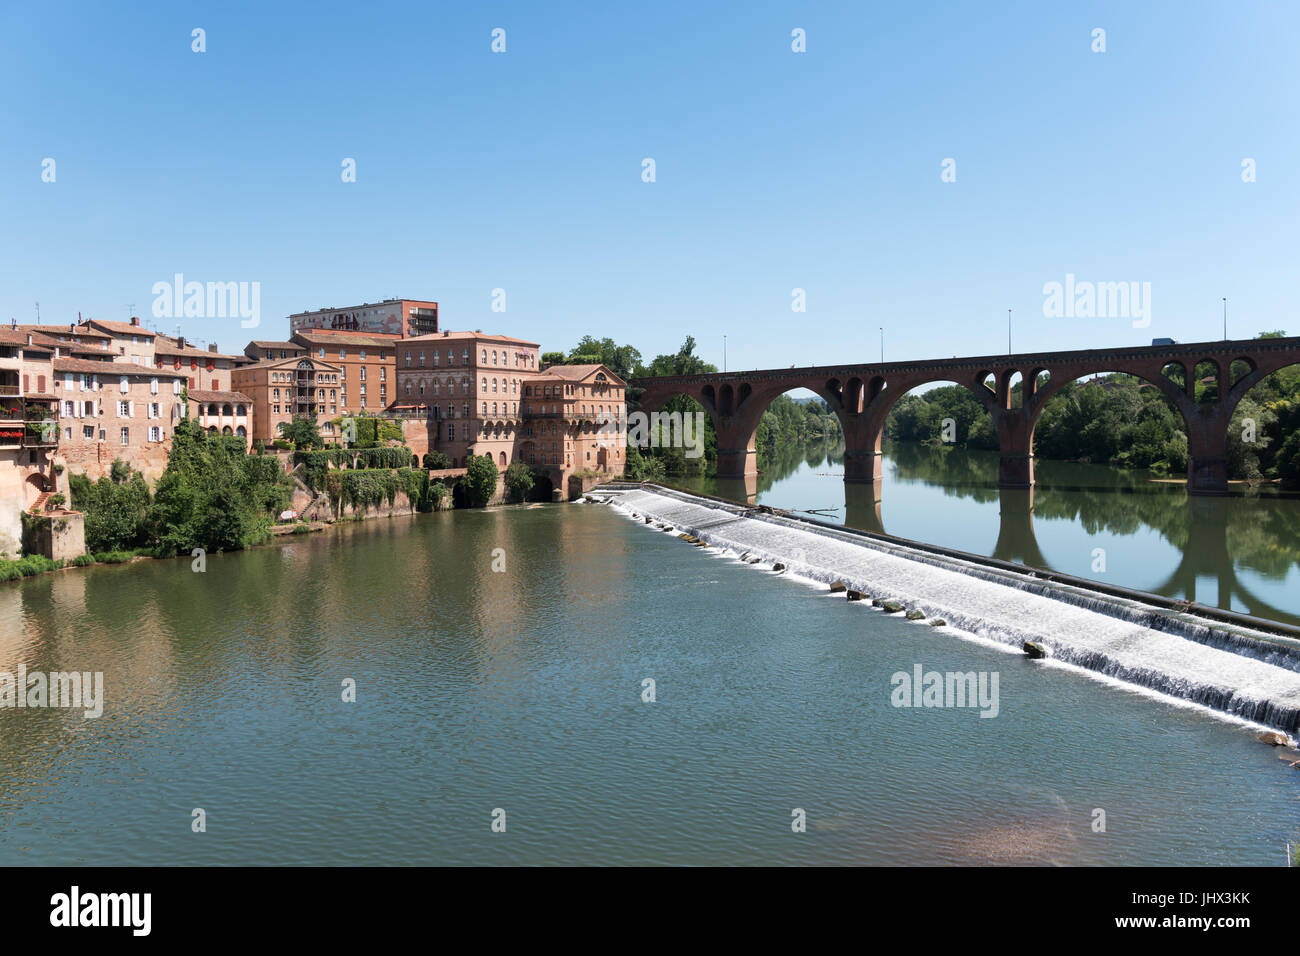 The weir across the river Tarn in Albi with the Mercure Hotel at the end of the bridge, France Stock Photo